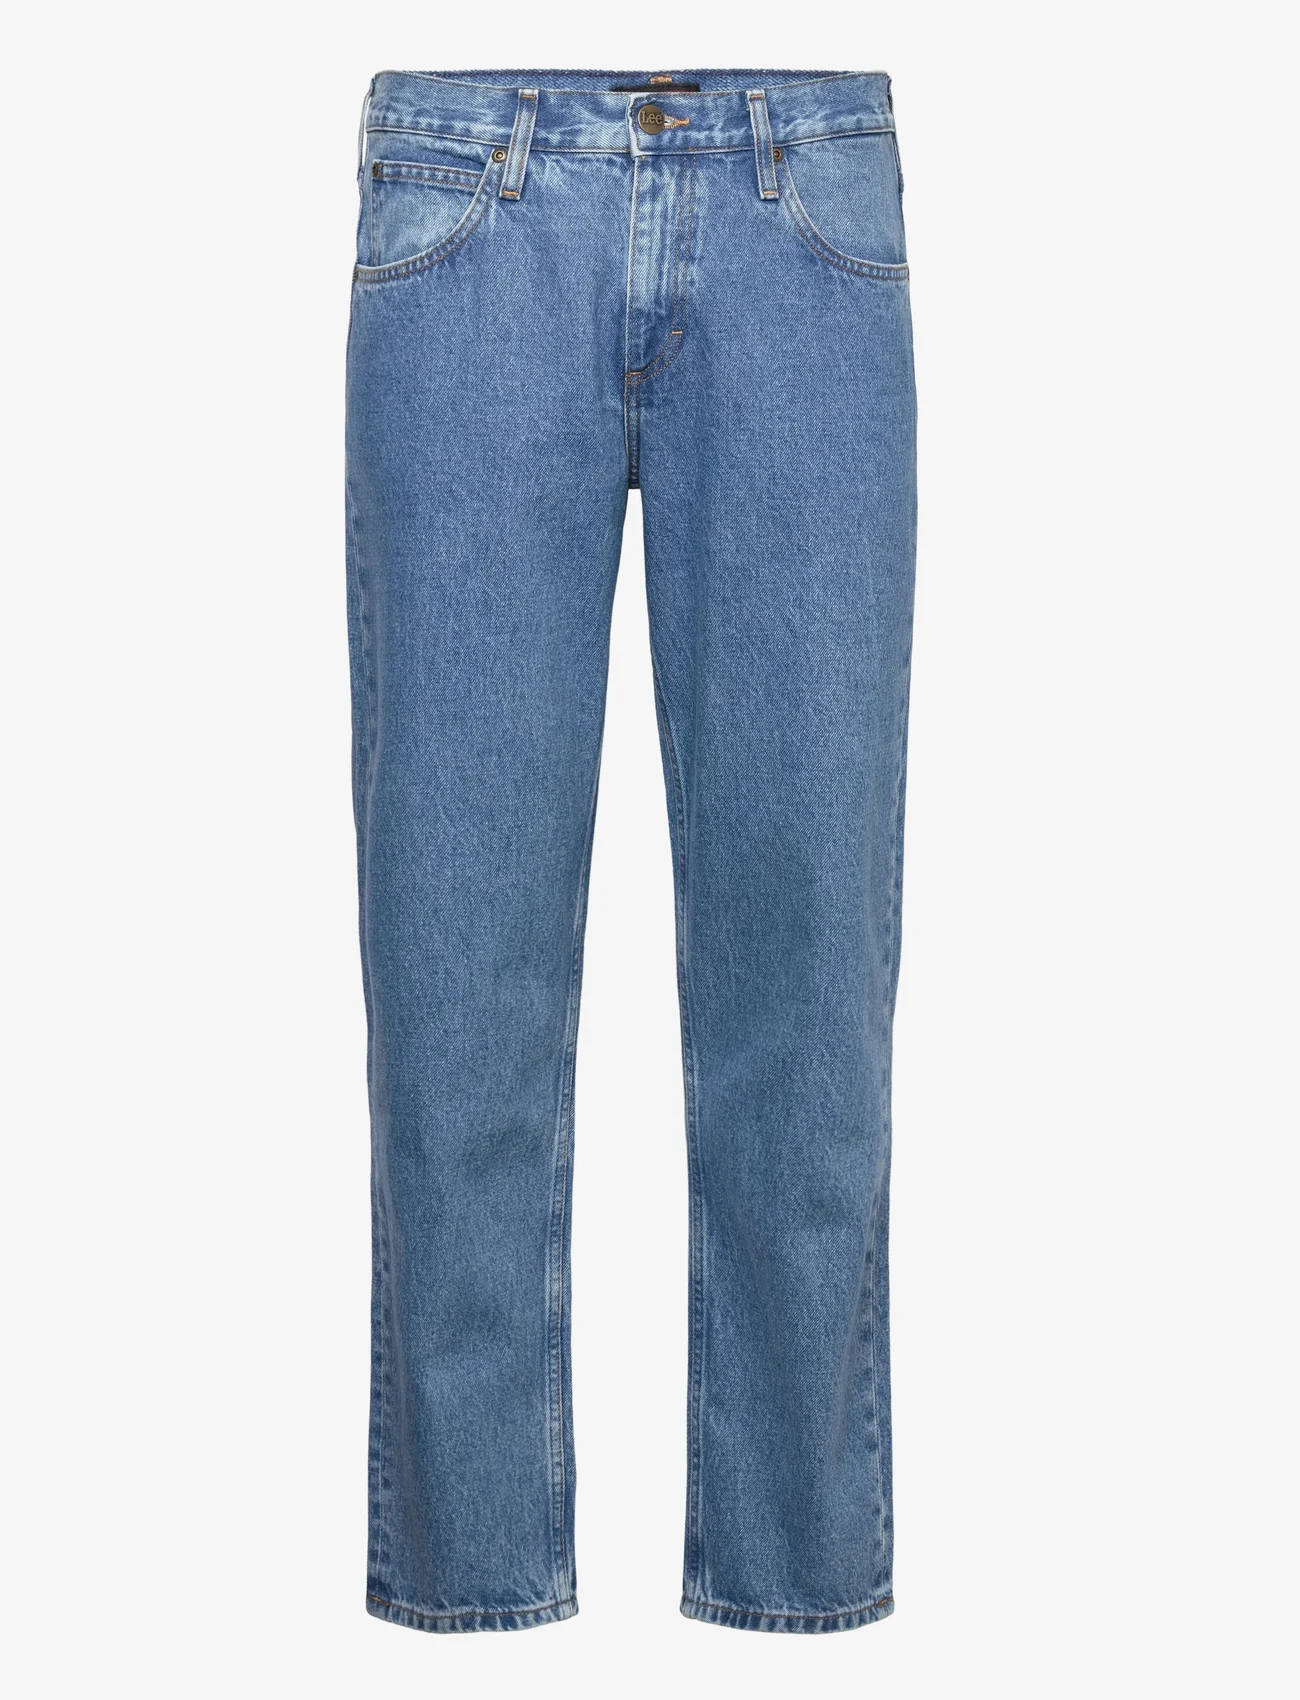 Lee Jeans - OSCAR - relaxed jeans - stone free - 0